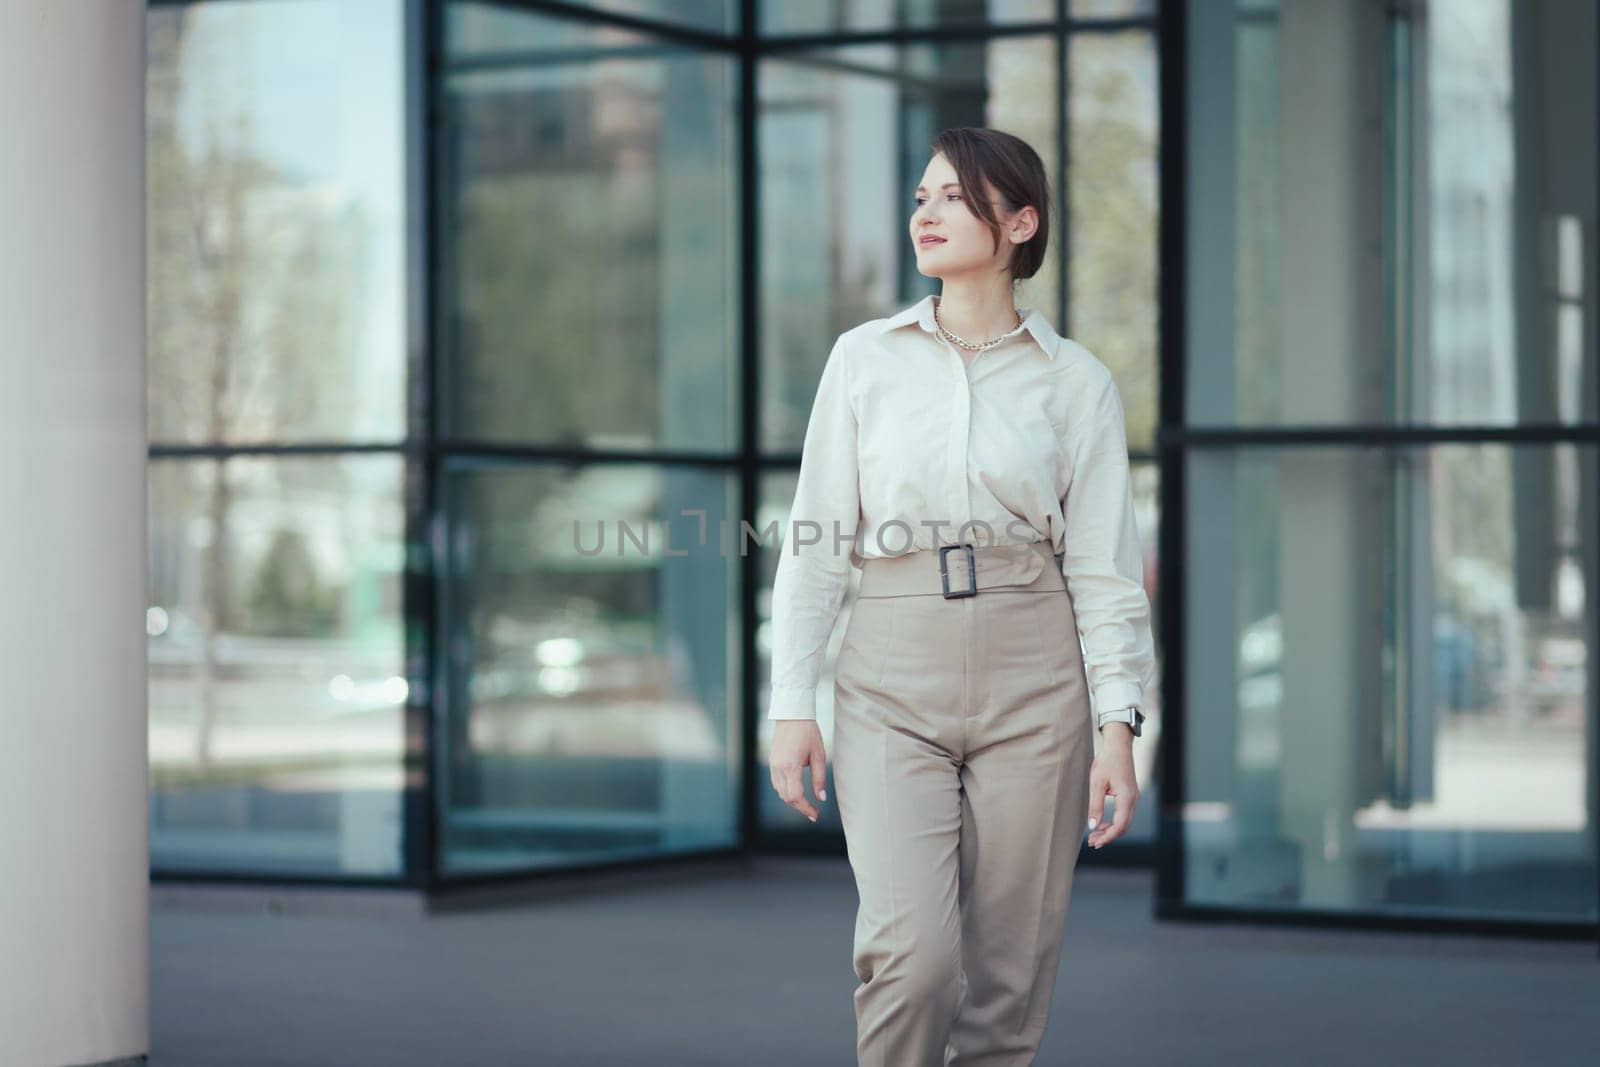 Portrait of a successful business woman in a business suit comes out of a modern business building, looks to the side.